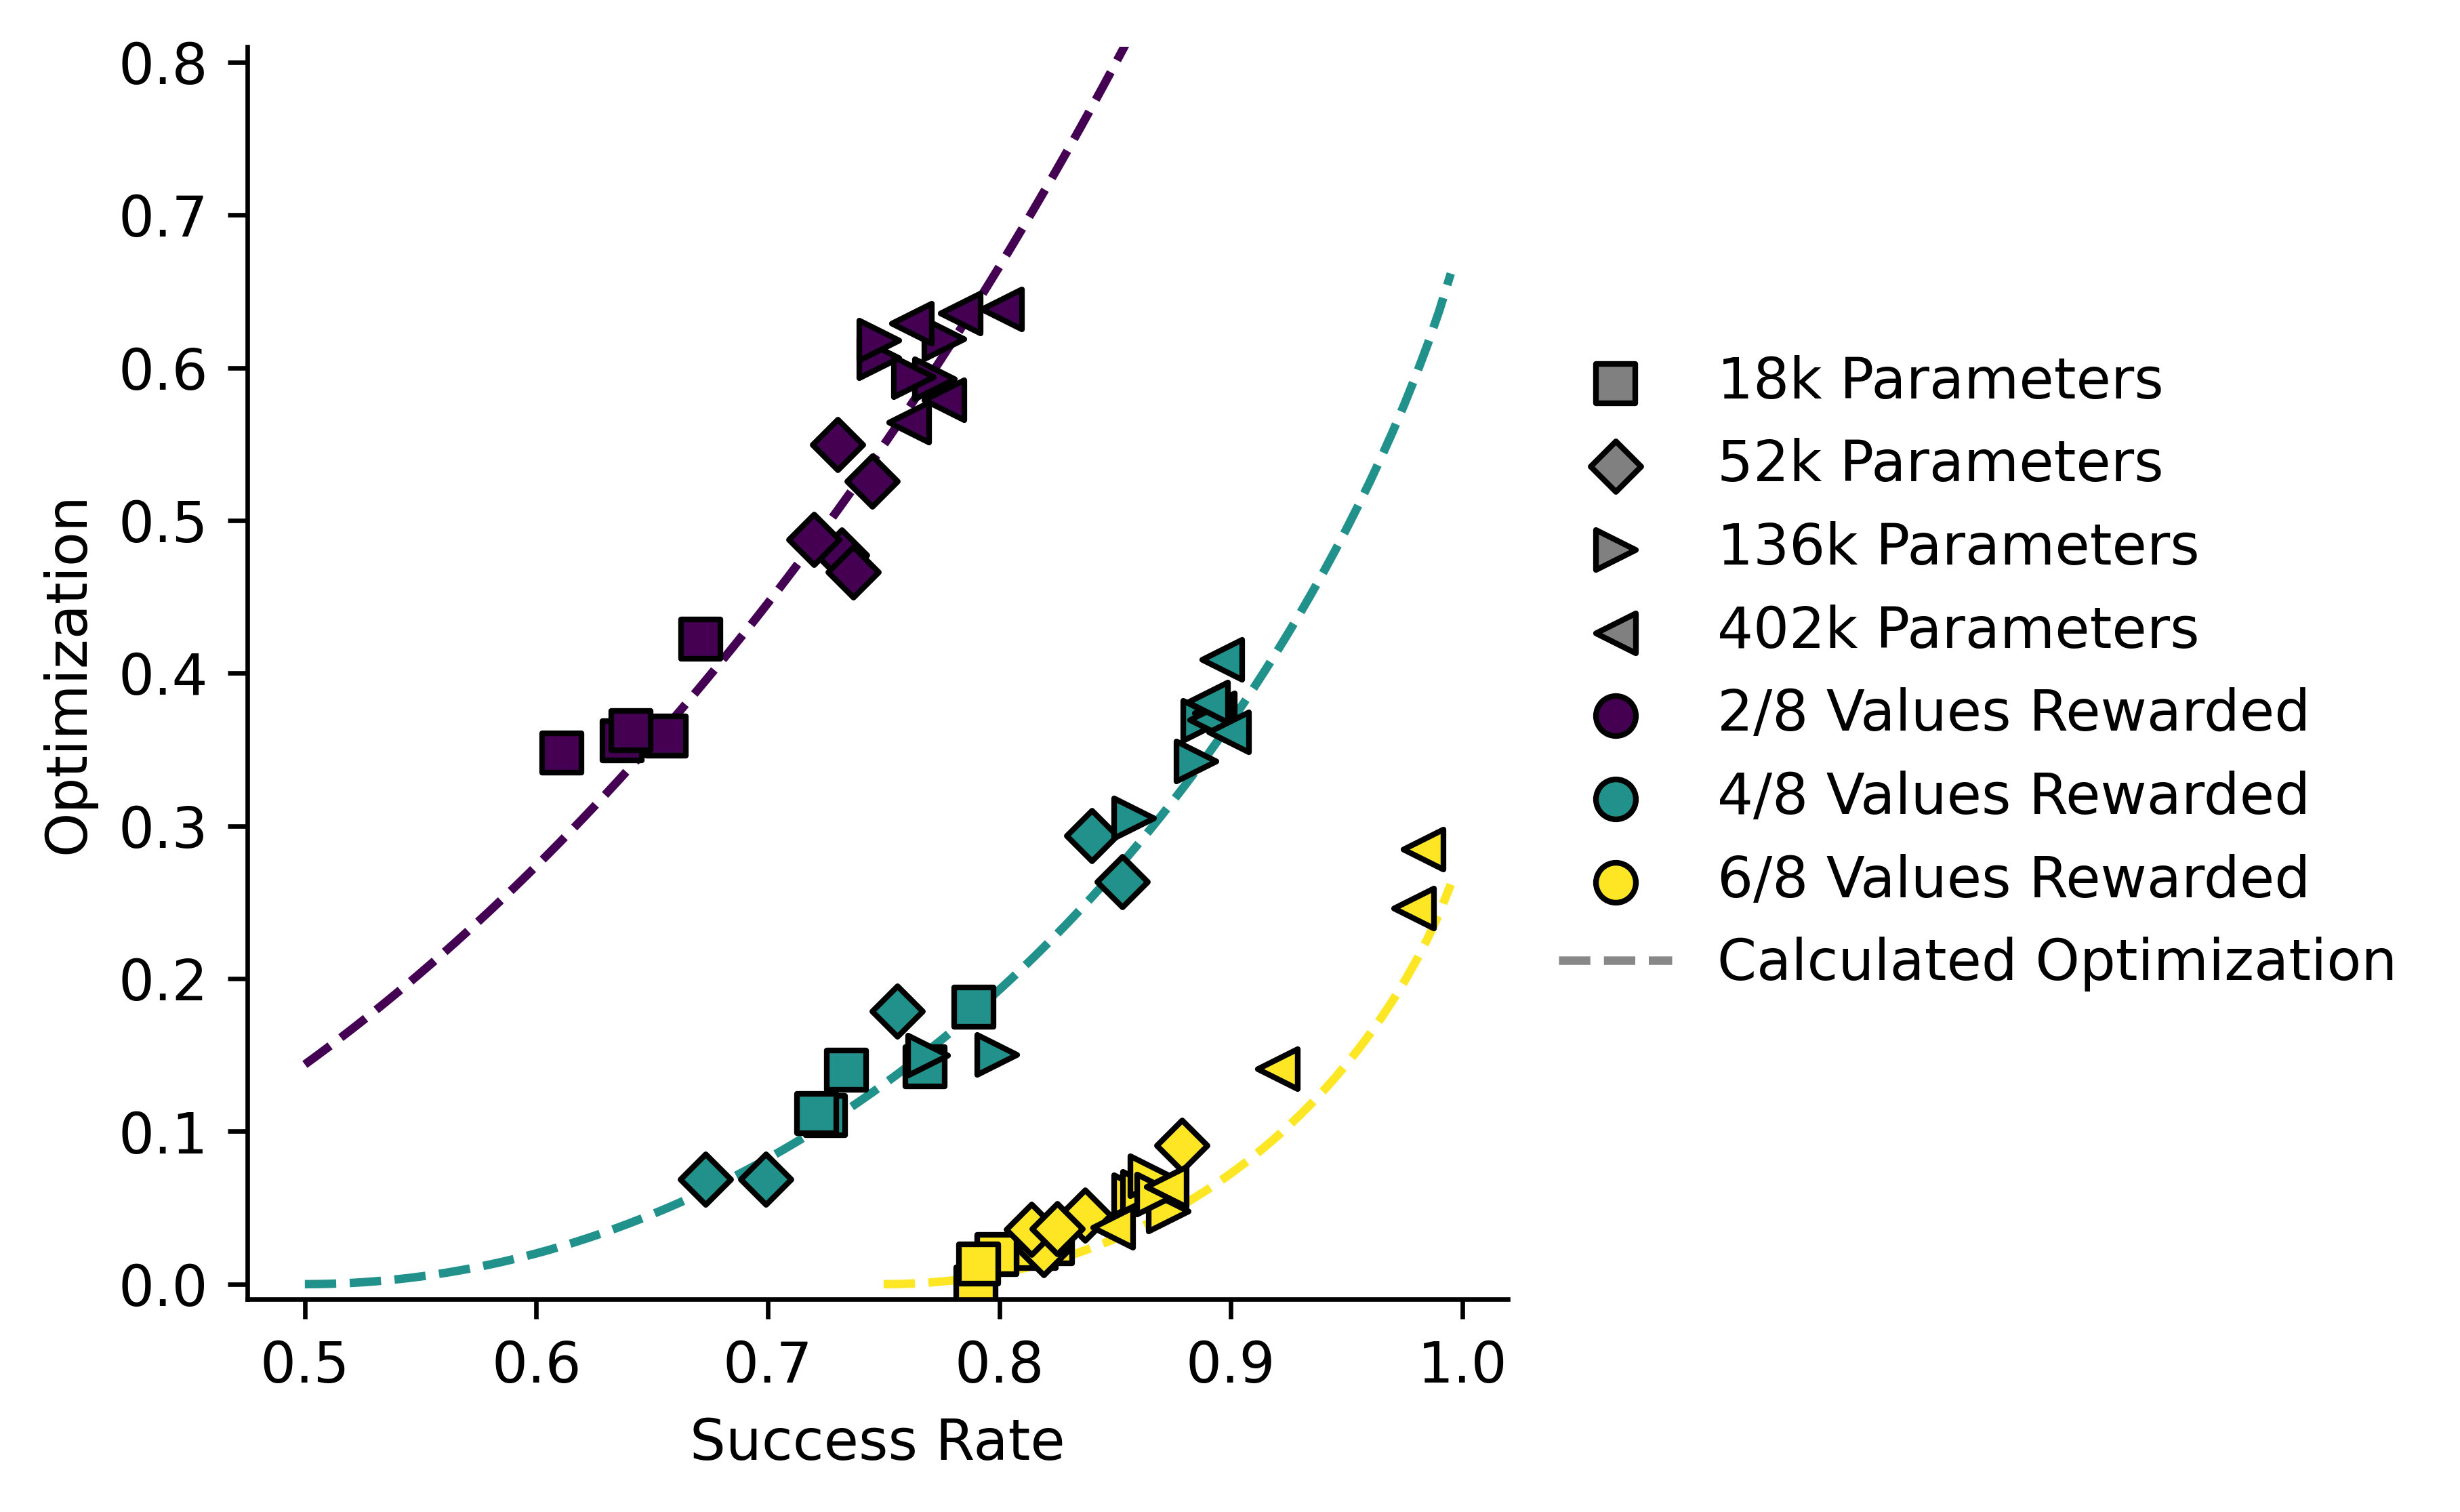 A plot showing optimization plotted against success rate for three conditions. Three series of points are shown, each sitting on a similarly-colored curve.